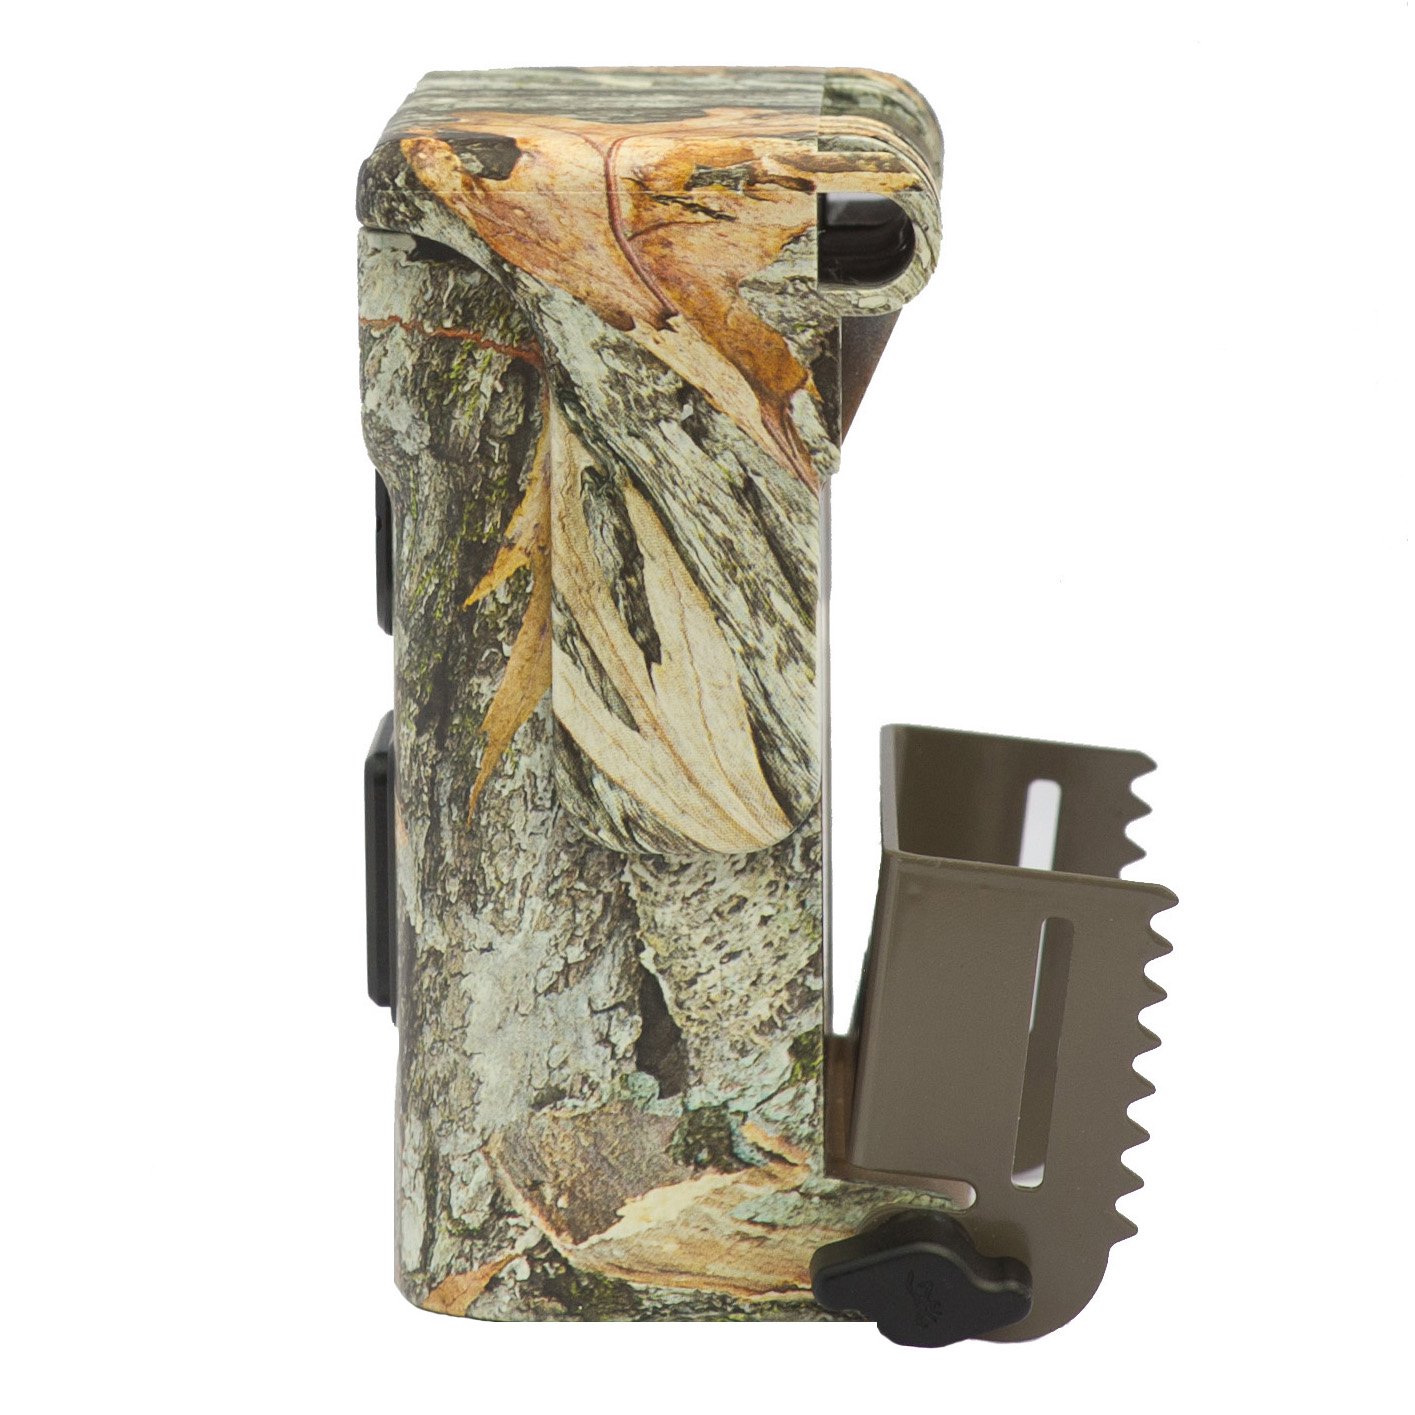 Browning Defender 850 Wifi/Bluetooth 20MP Trail Game Security Camera - BTC-9D - image 2 of 5